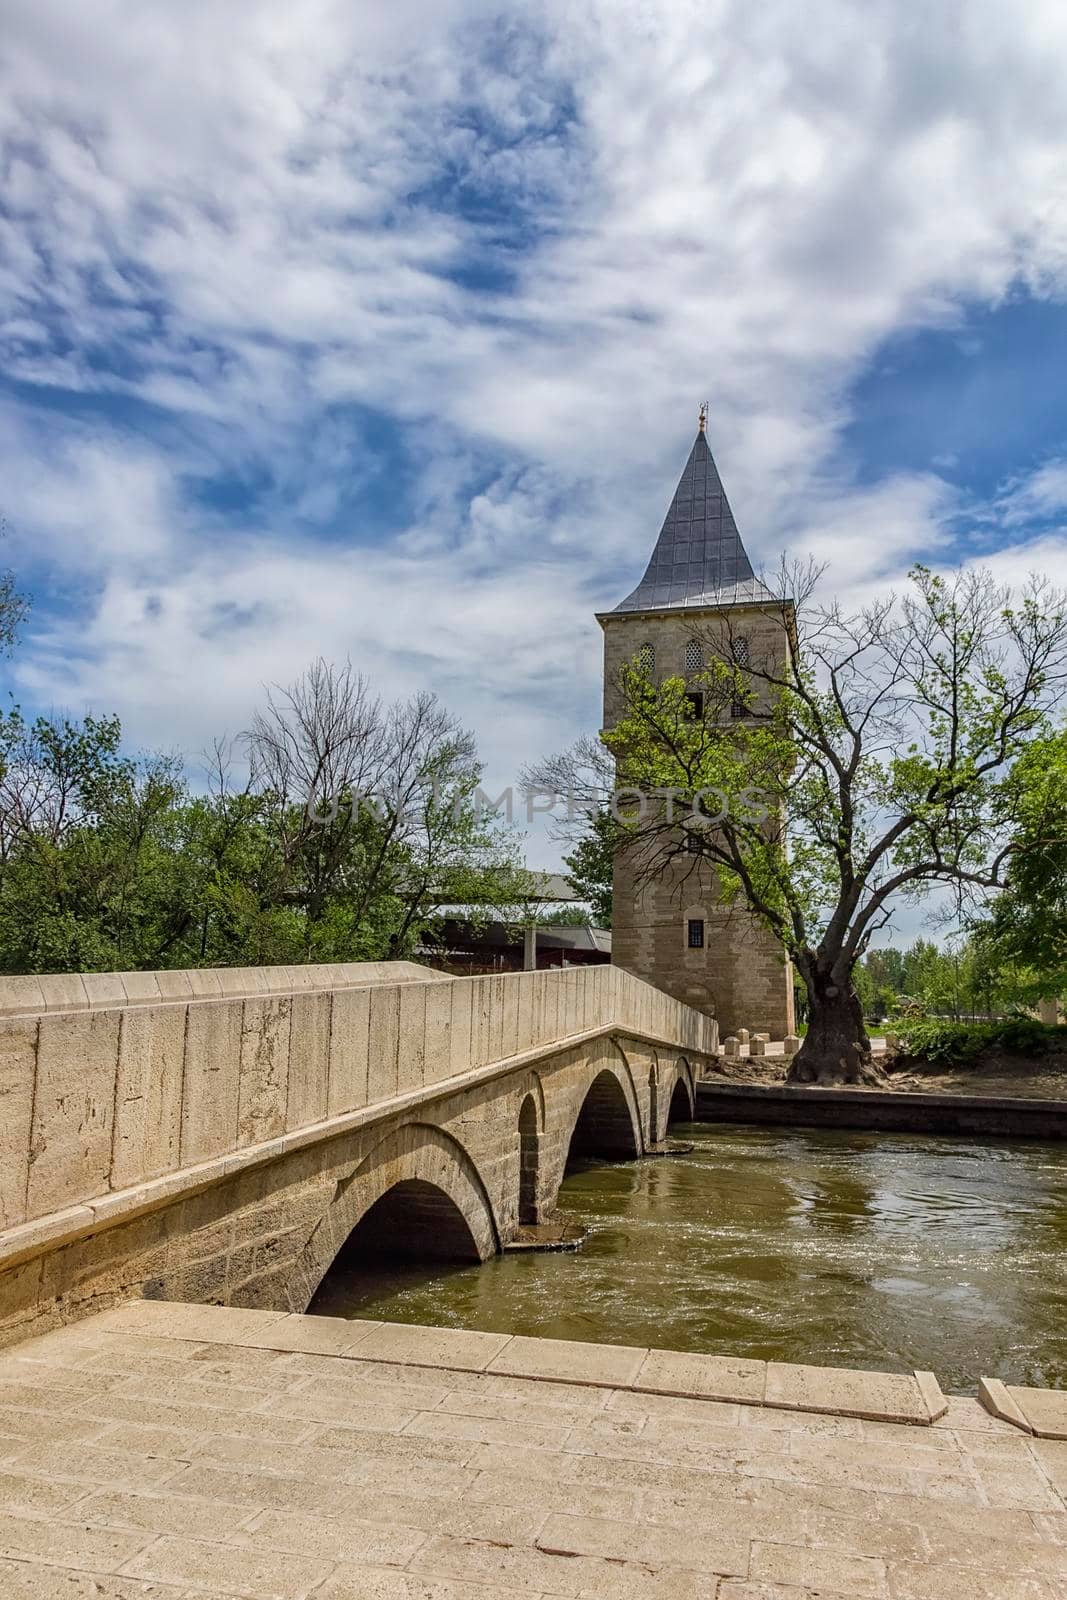 Court Tower of Justice and Sultan Suleyman bridge in Edirne city of Turkey.Freedom tower to kirkpinar using old stone bridge by EdVal